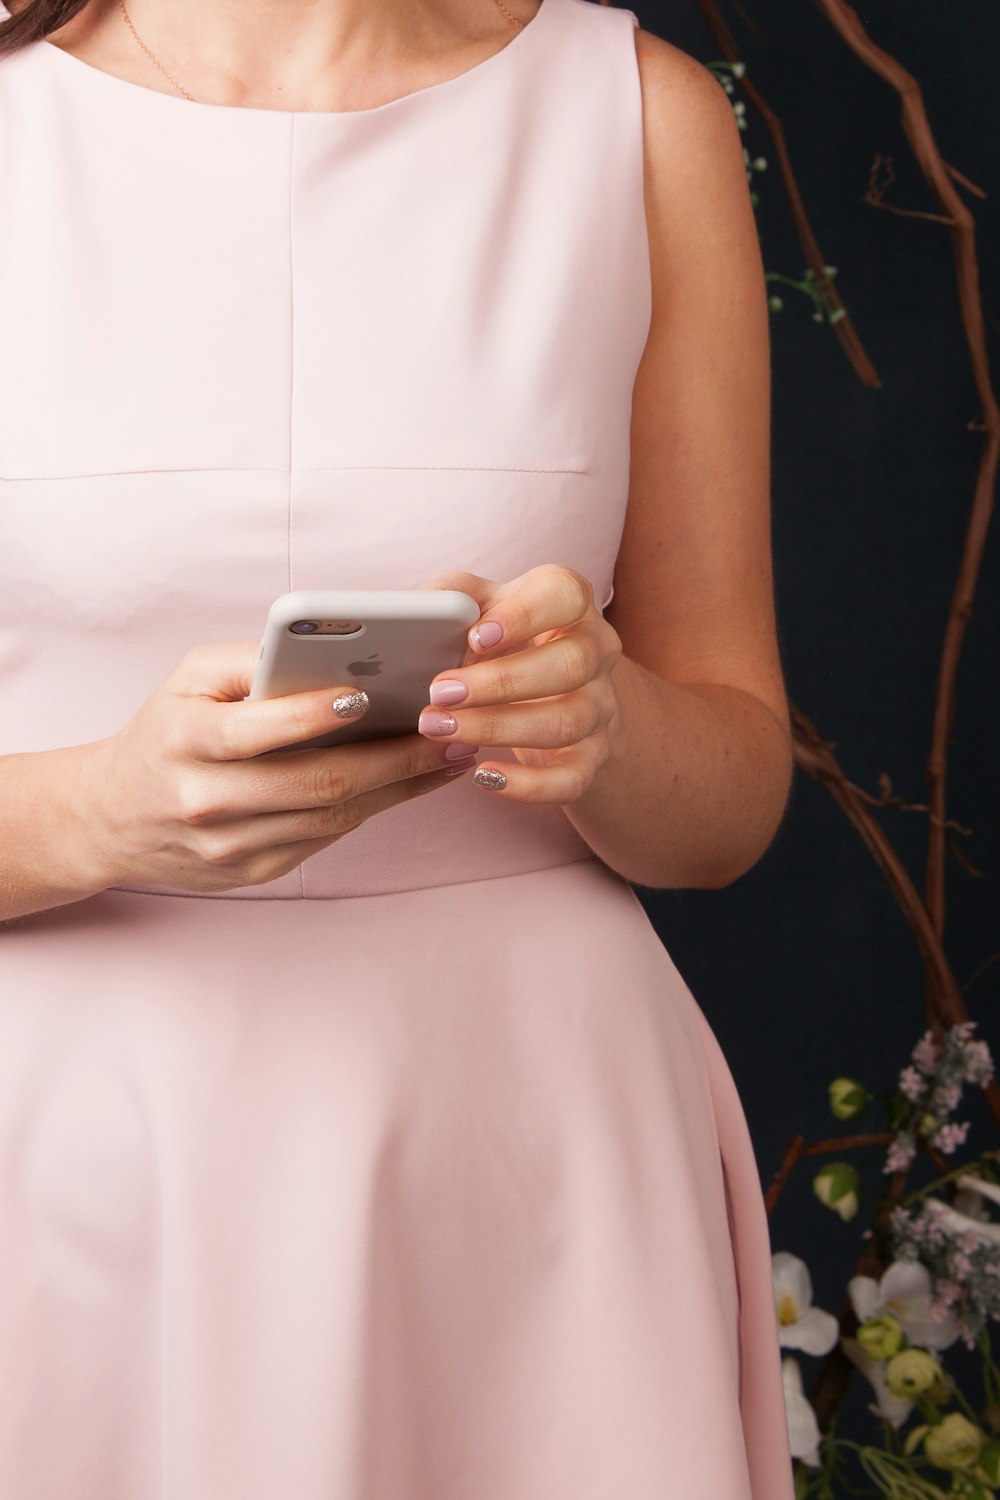 woman in white sleeveless dress holding silver iphone 6